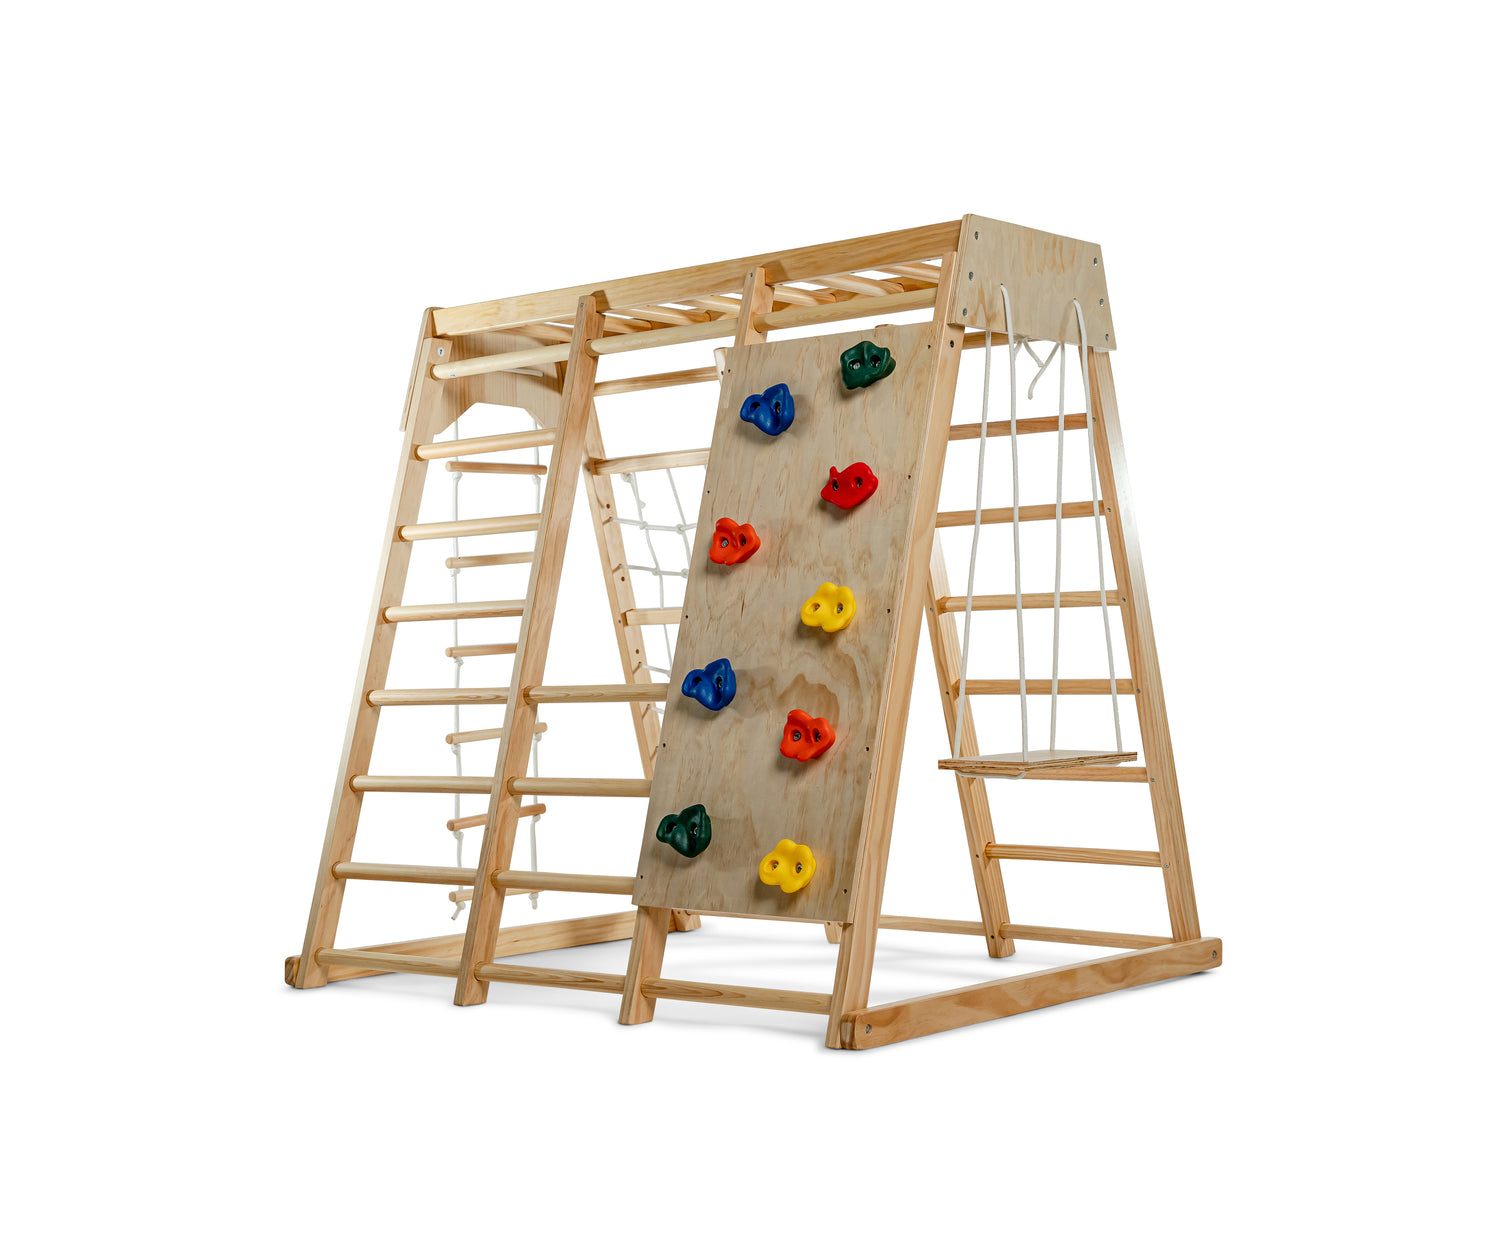 Avenlur's Magnolia Natural Color Real Wood Large Climber Playset - Back View